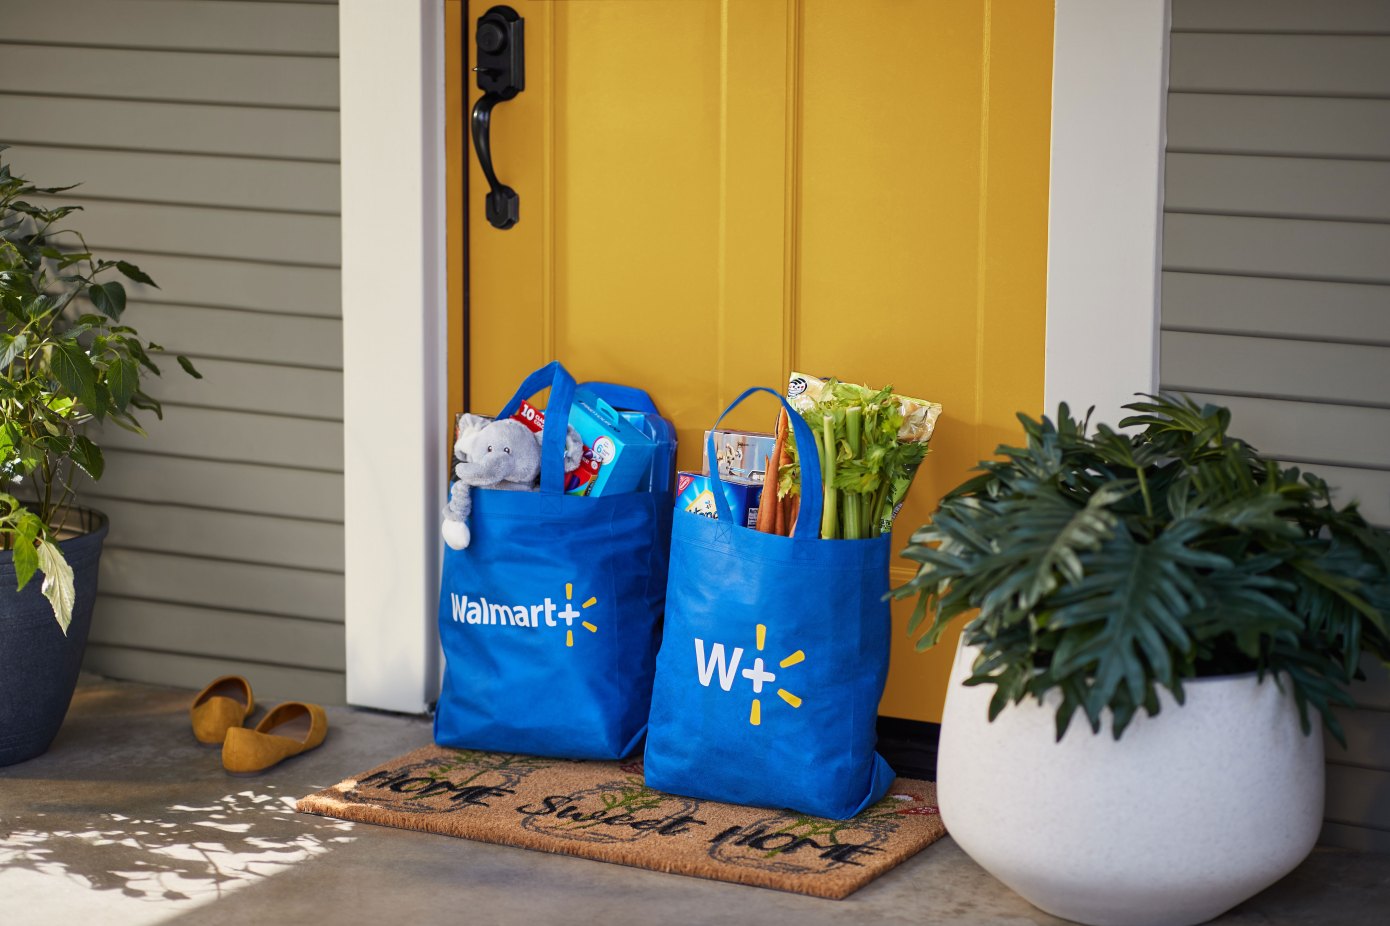 Walmart Launches Walmart+ with Special Benefits, Discounts for $98/yr